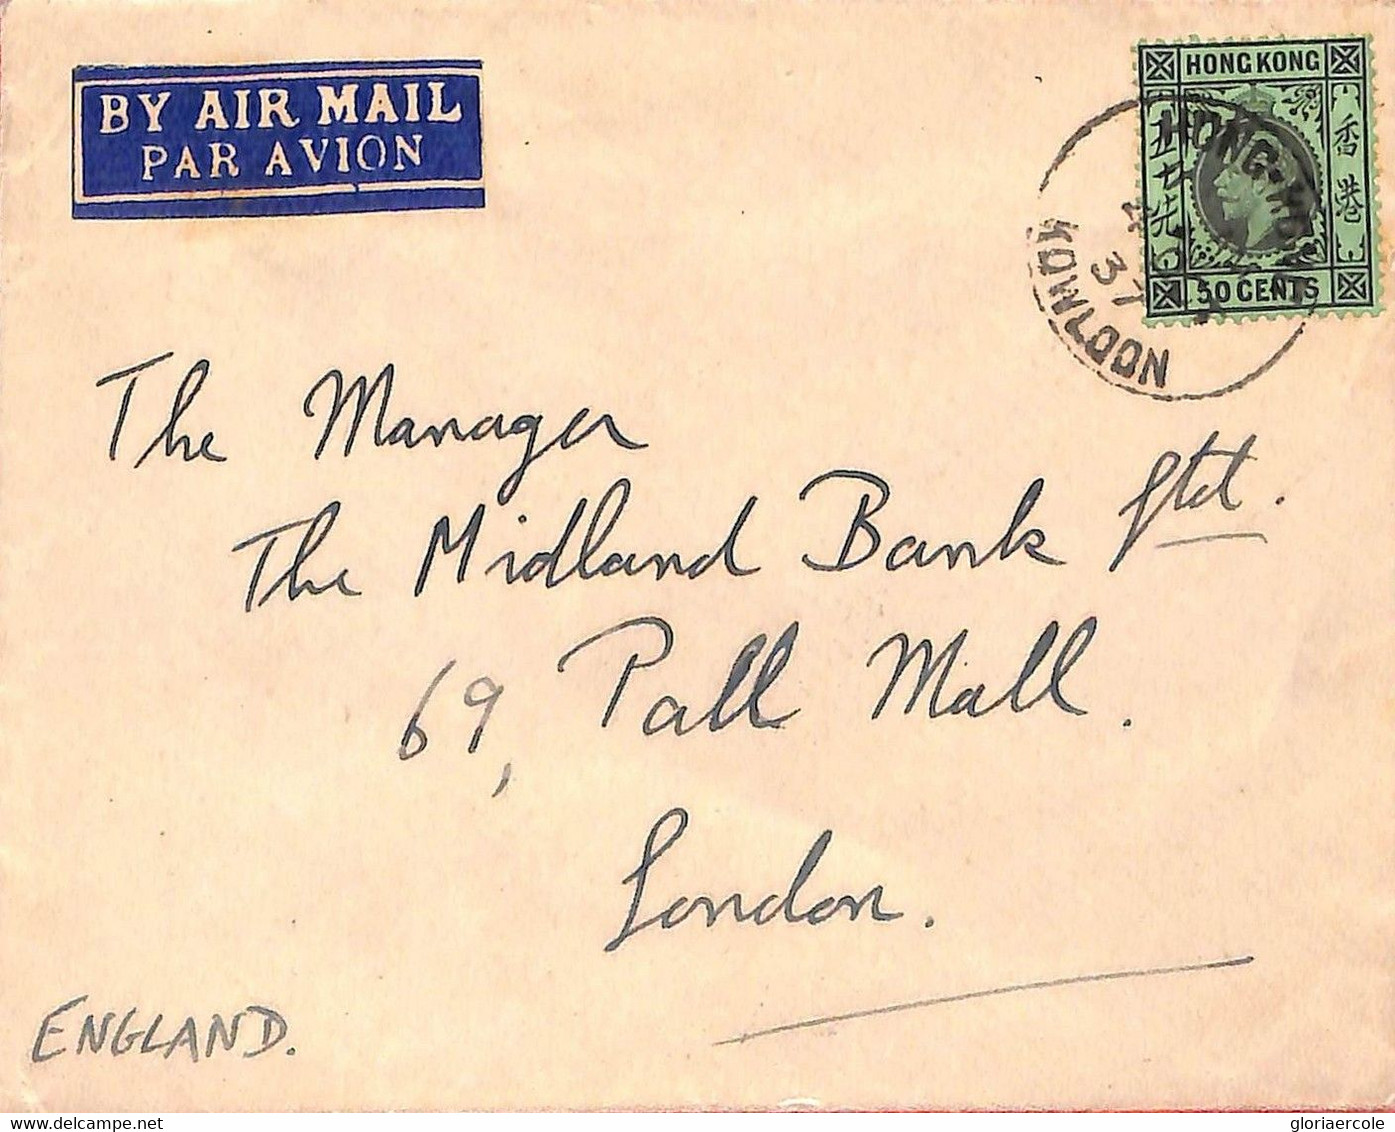 Aa6824 - HONG KONG - POSTAL HISTORY -  COVER From KOWLOON To ENGLAND 1937 - Covers & Documents